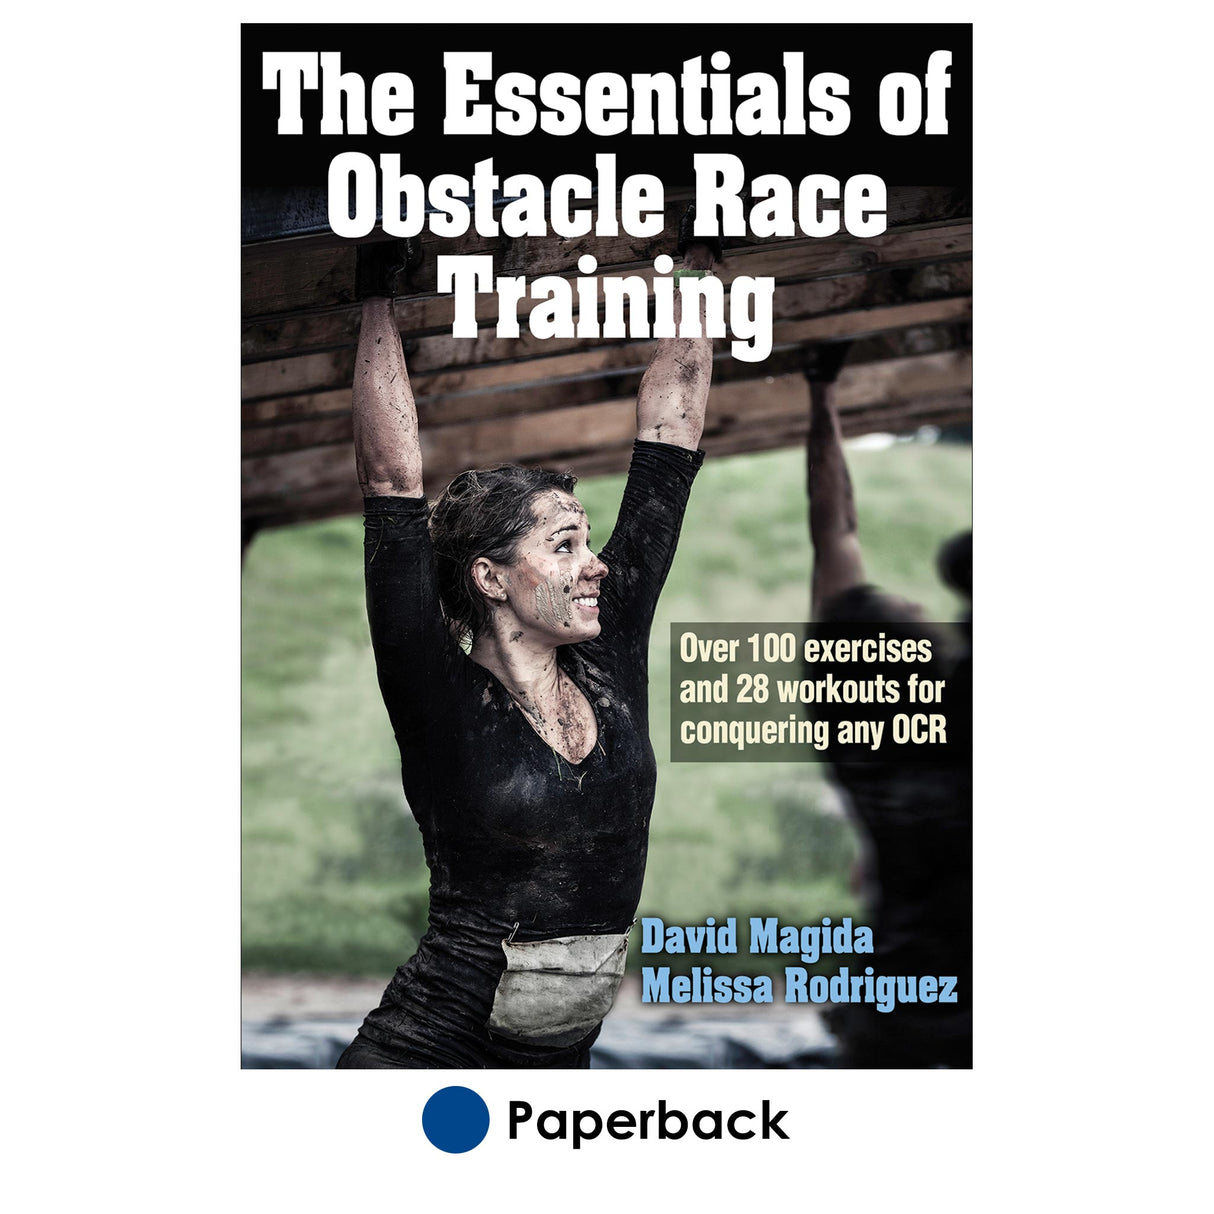 Essentials of Obstacle Race Training, The